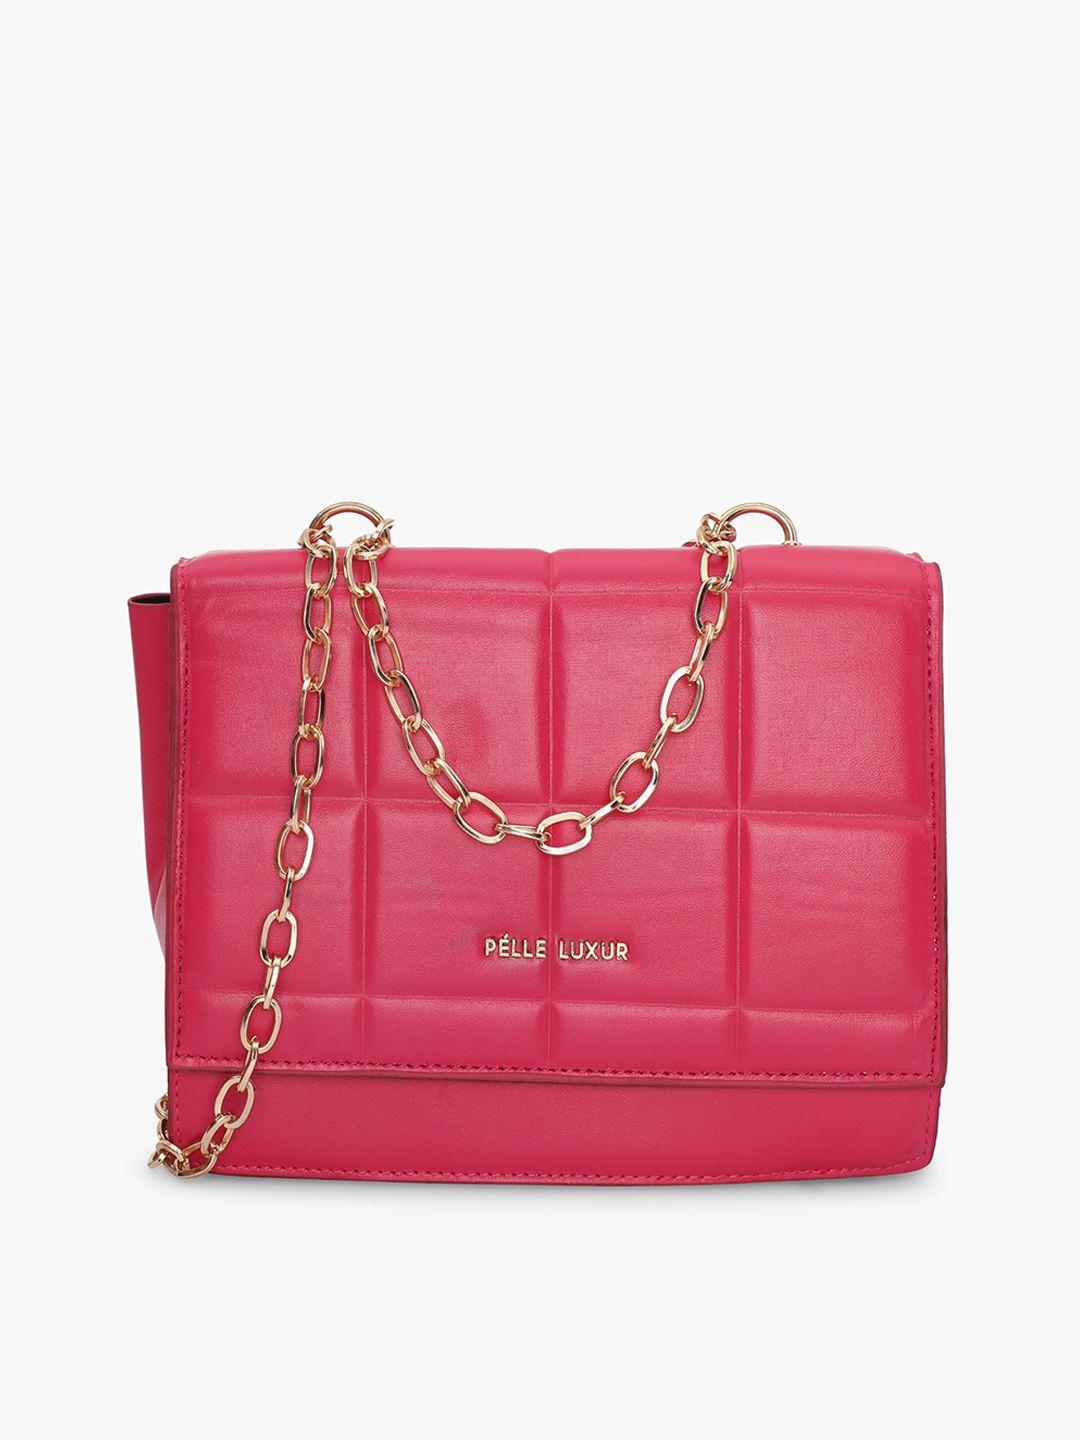 pelle luxur pink pu structured sling bag with quilted